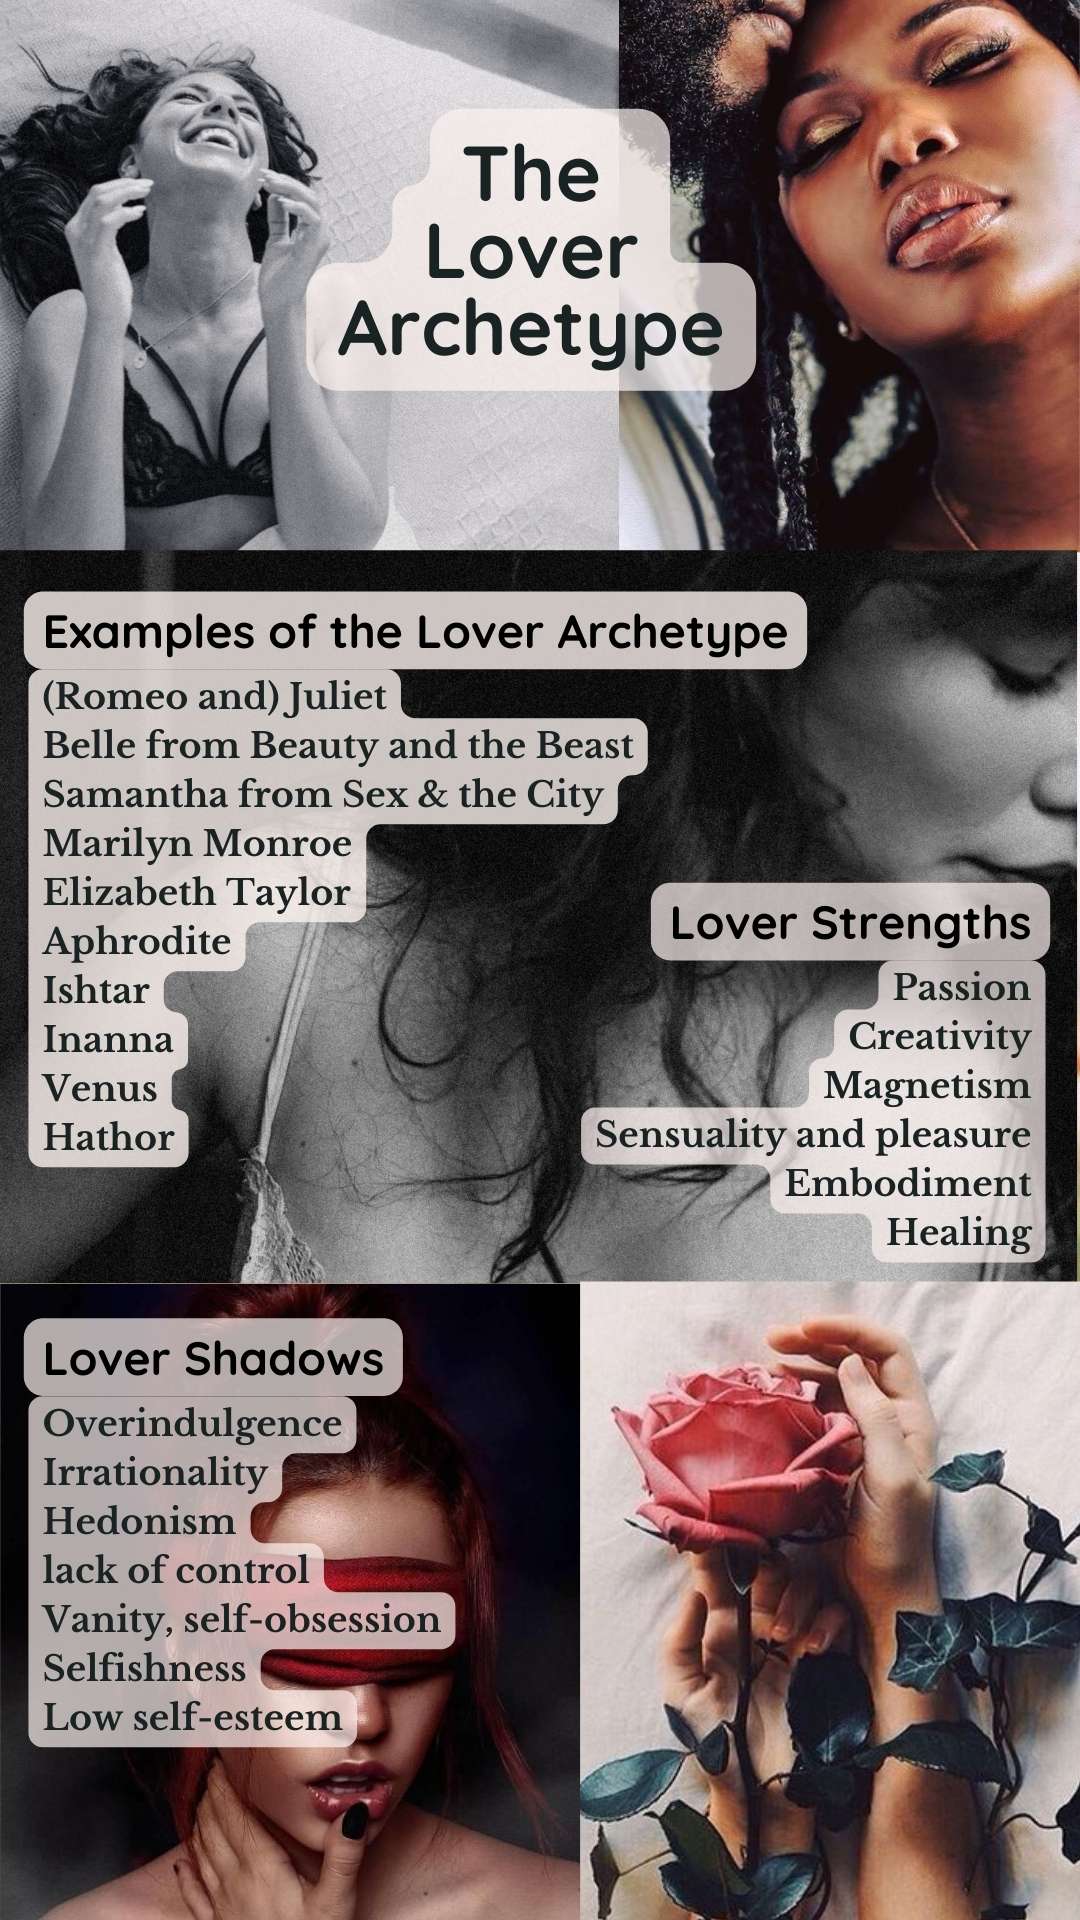 Guide to the Lover Archetype with examples, strengths and shadow side